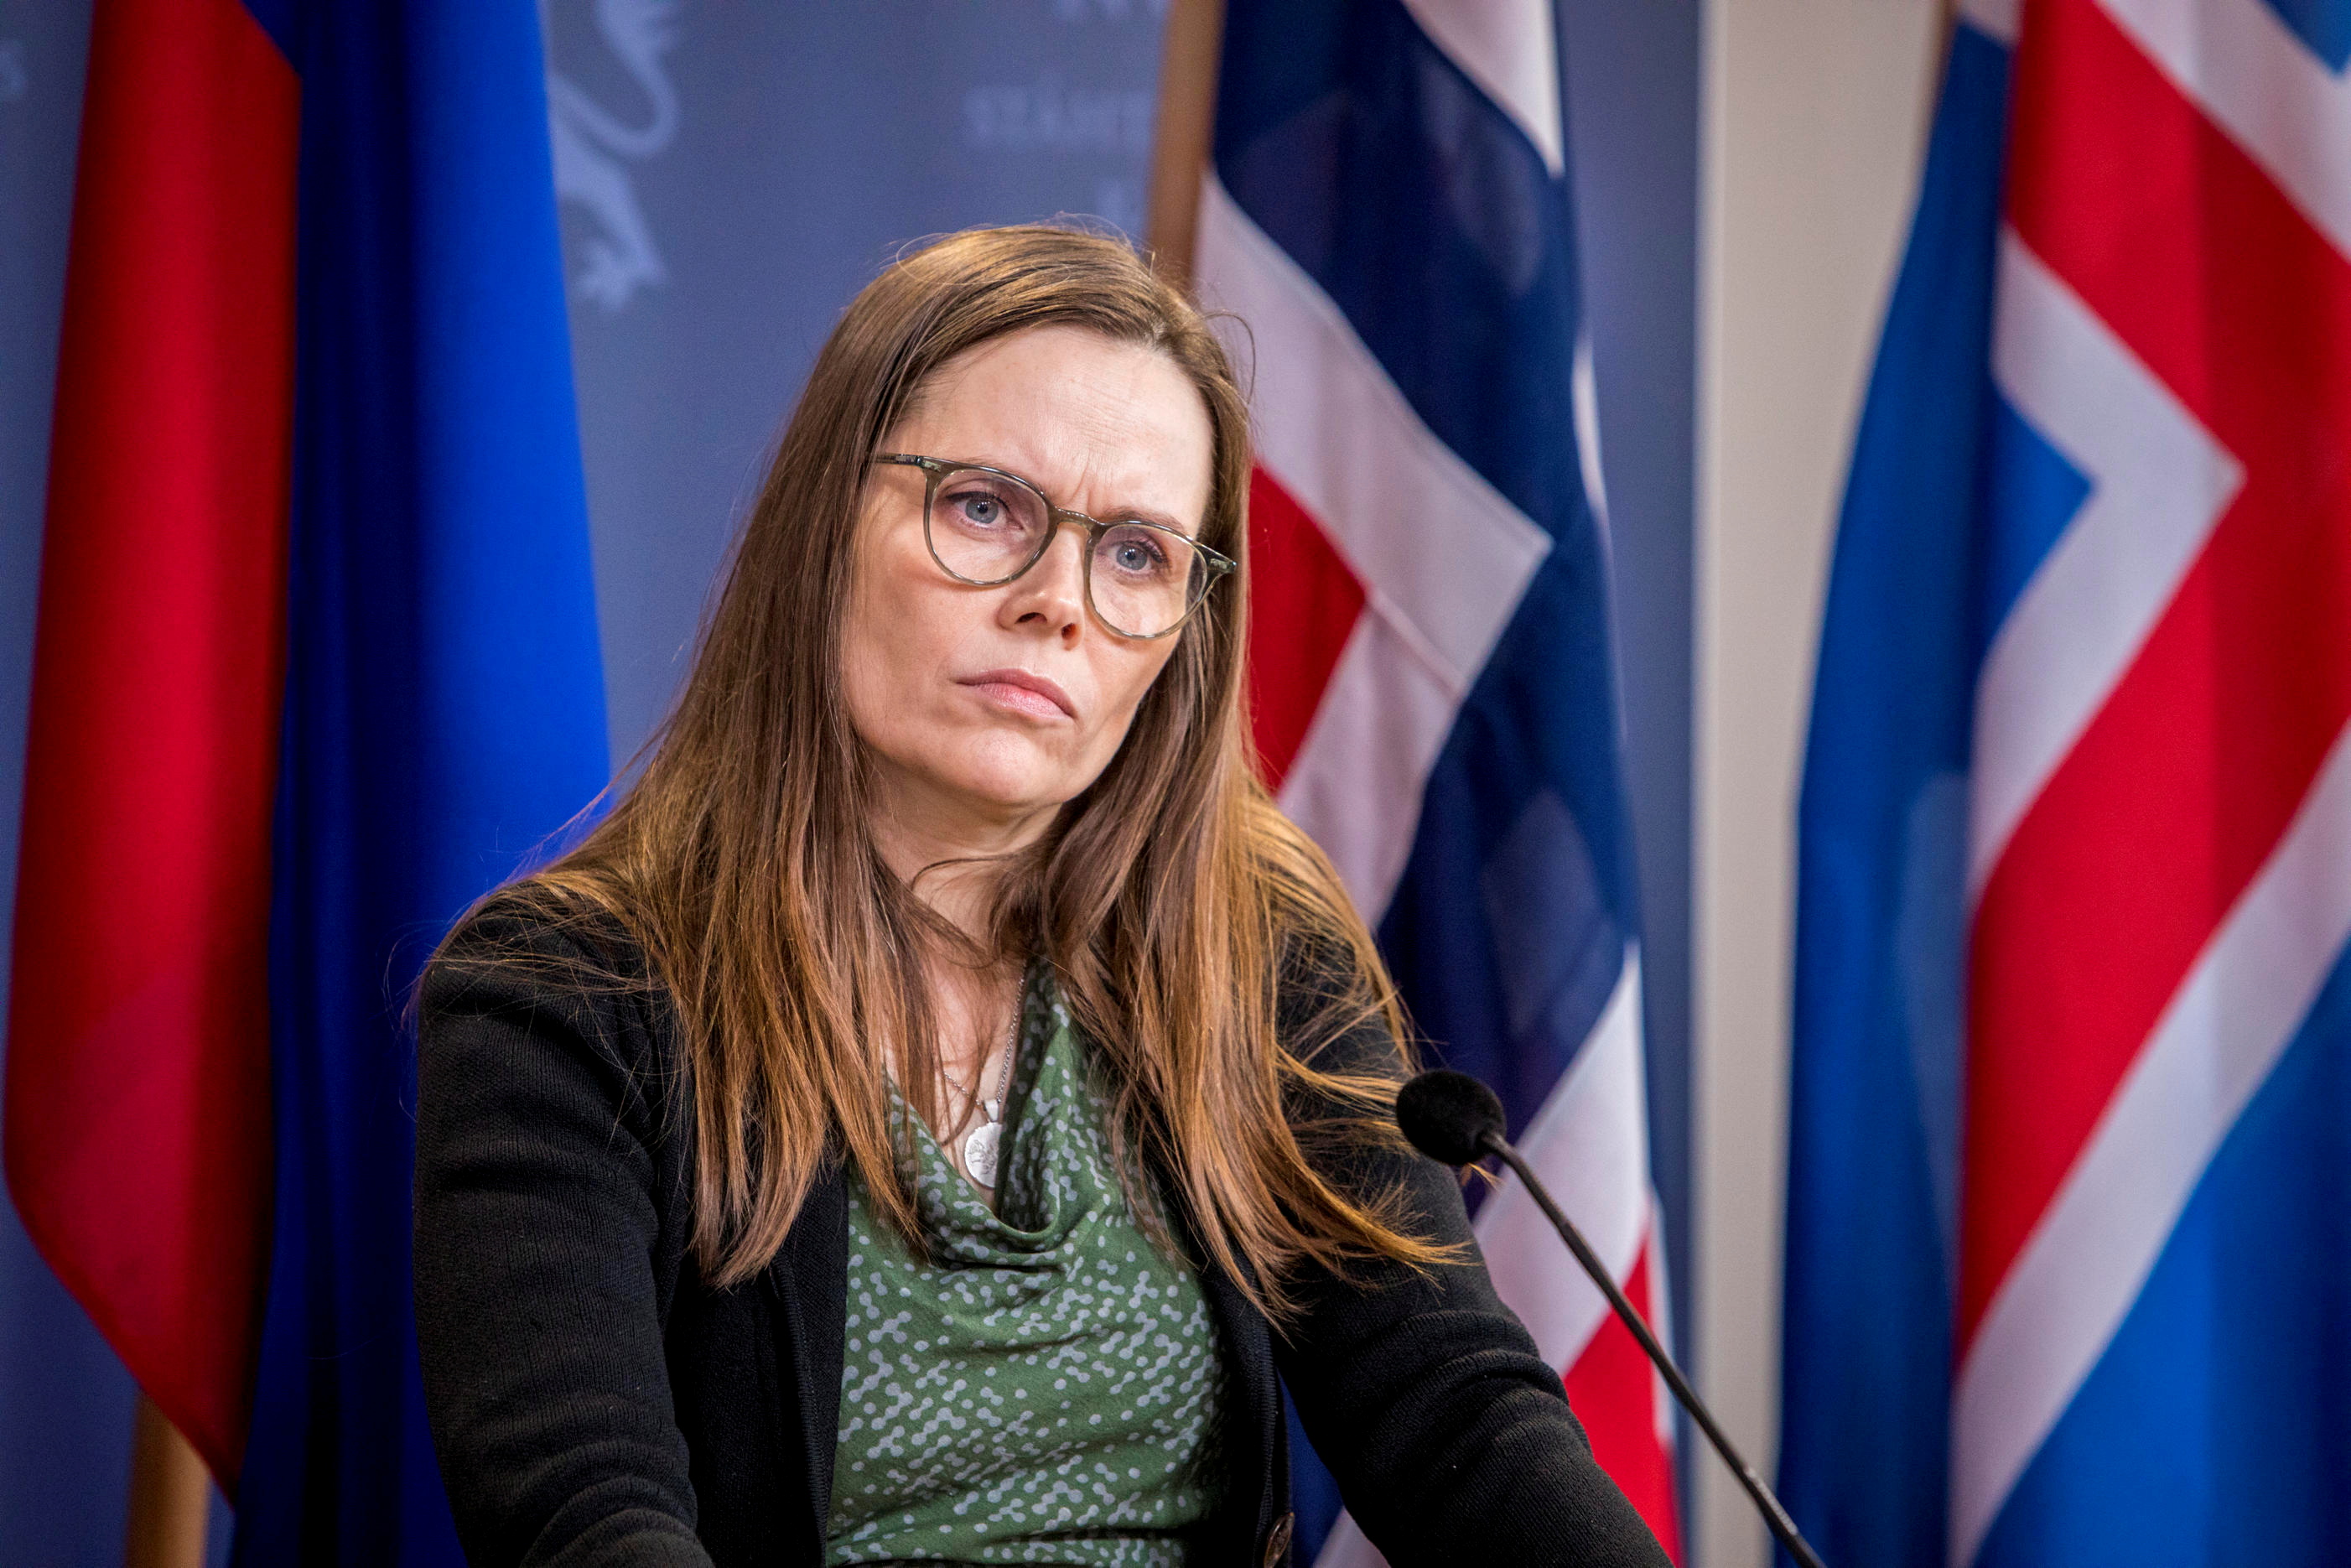 Iceland's Prime Minister Katrin Jakobsdottir attends a press conference in Oslo, Norway February 3, 2020. NTB Scanpix/Ole Berg-Rusten via REUTERS/File Photo